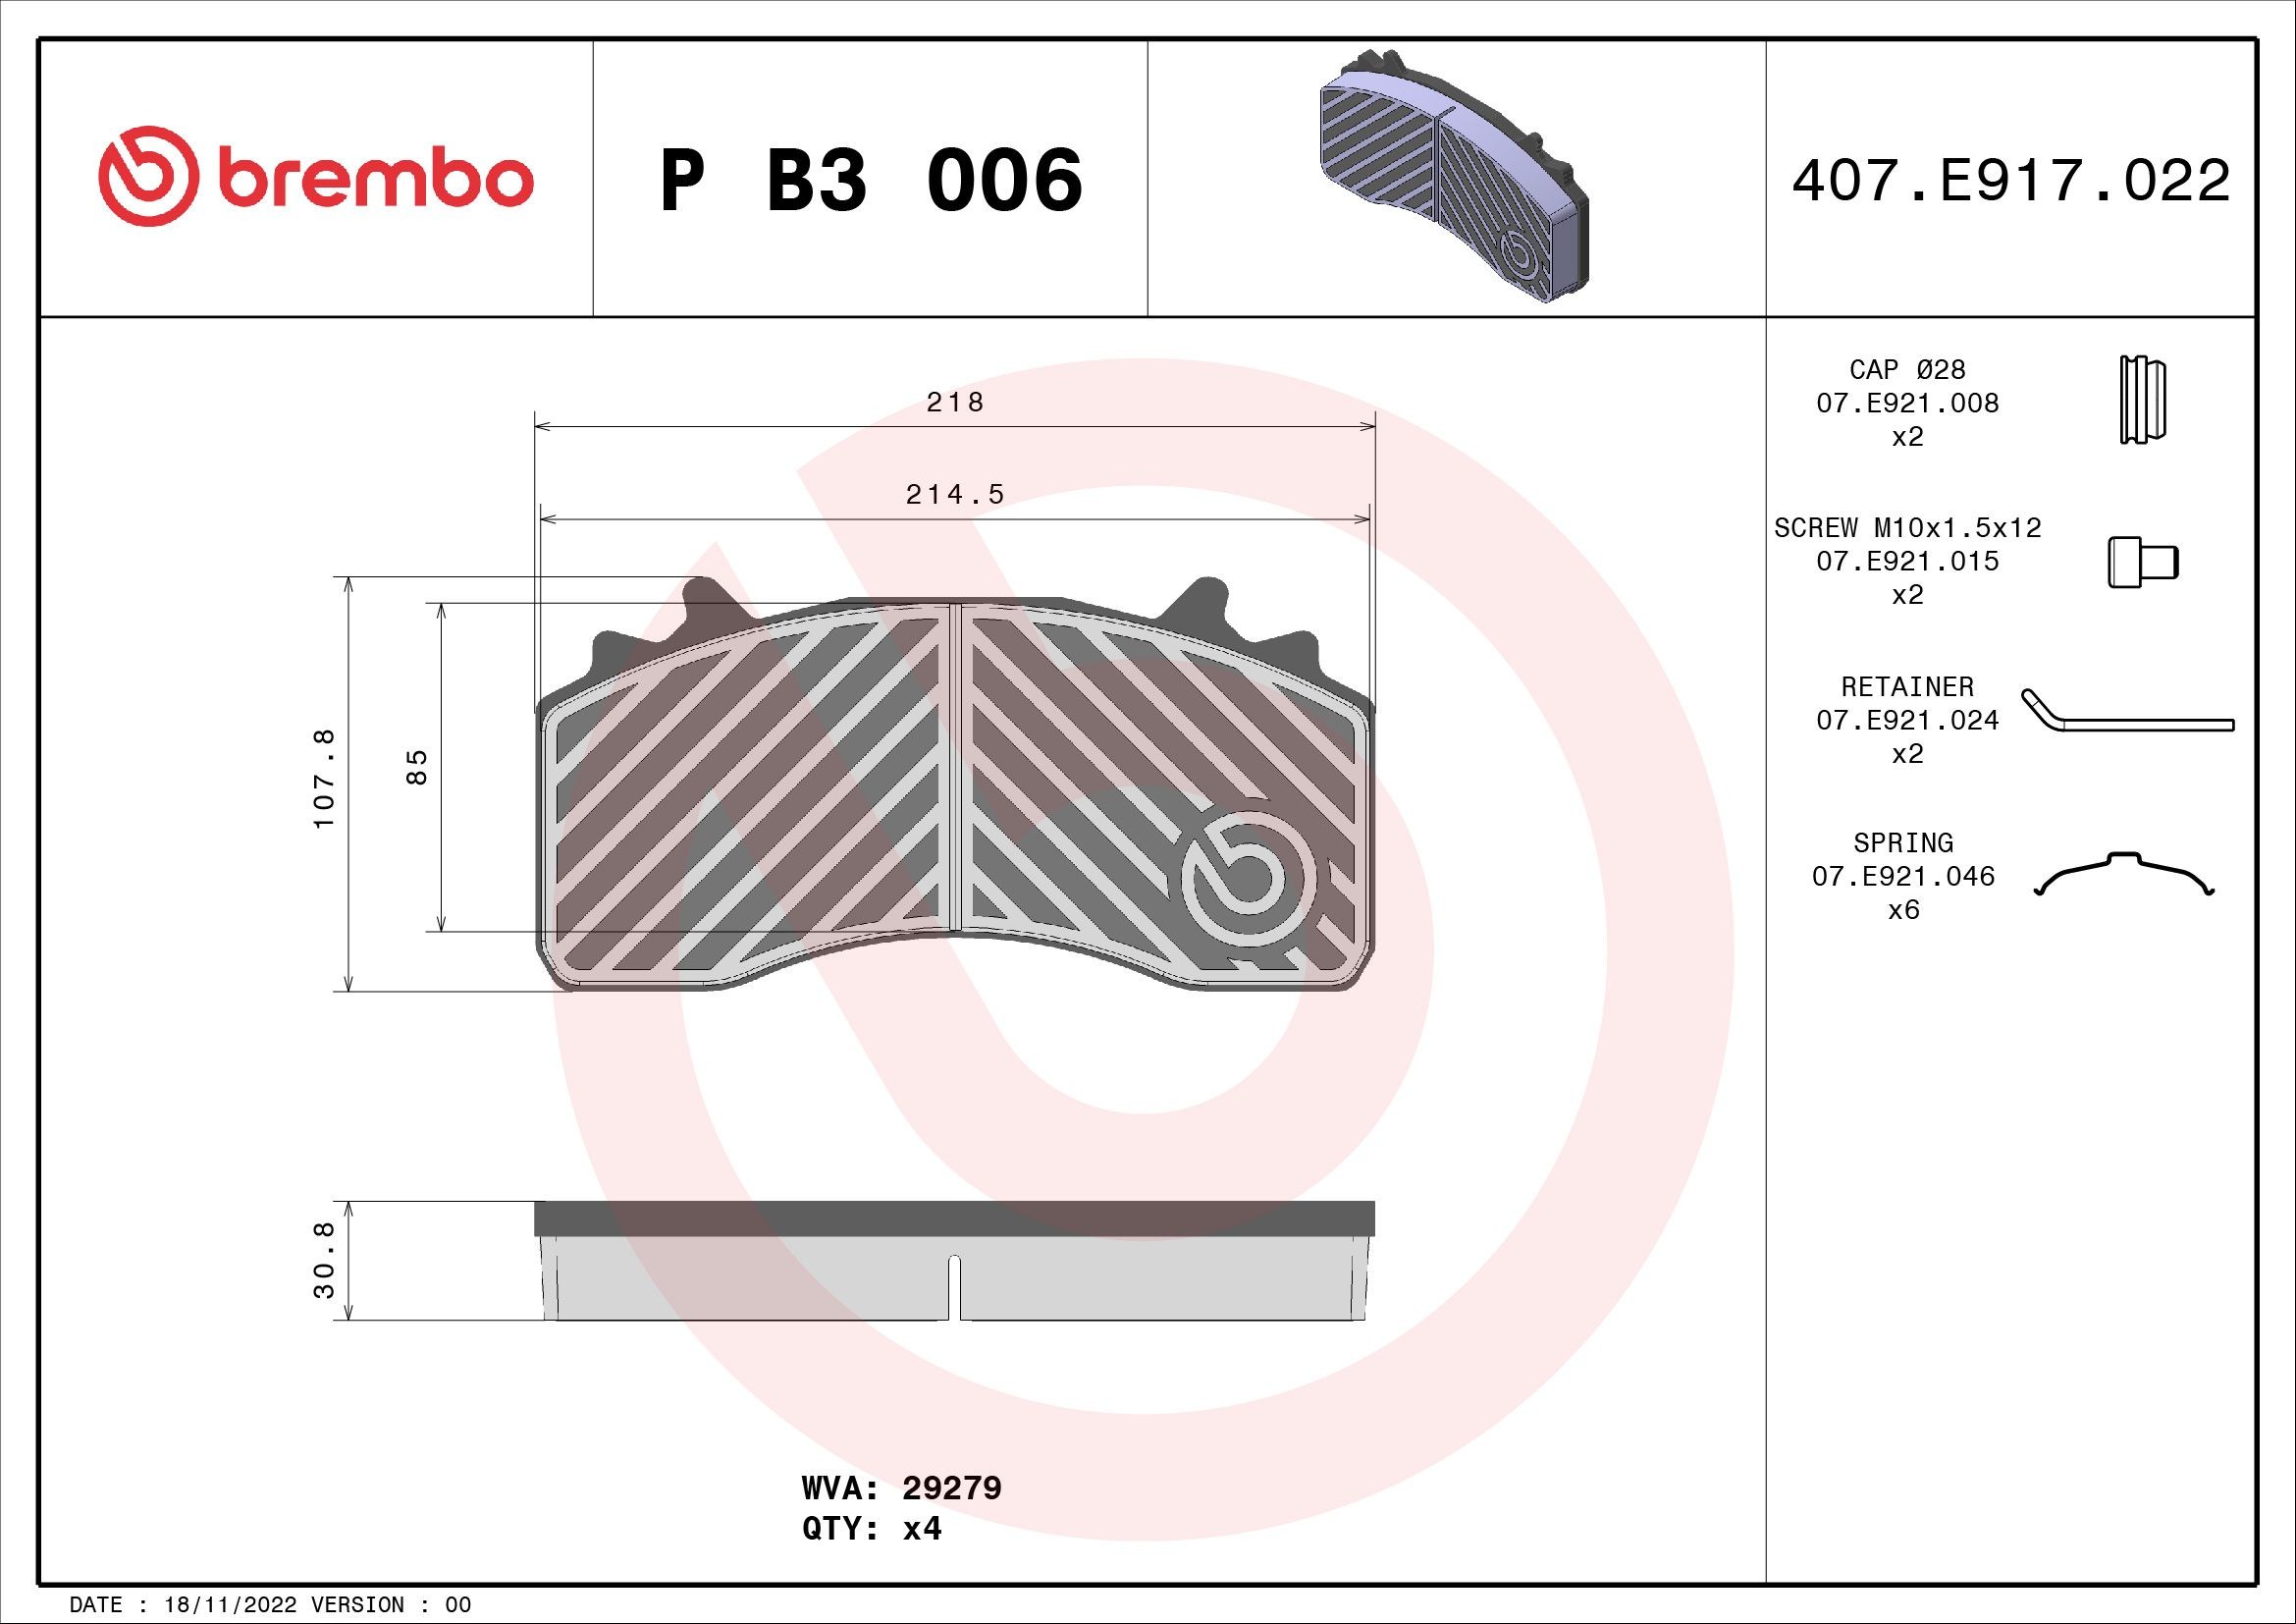 BREMBO P B3 006 Brake pad set excl. wear warning contact, with accessories